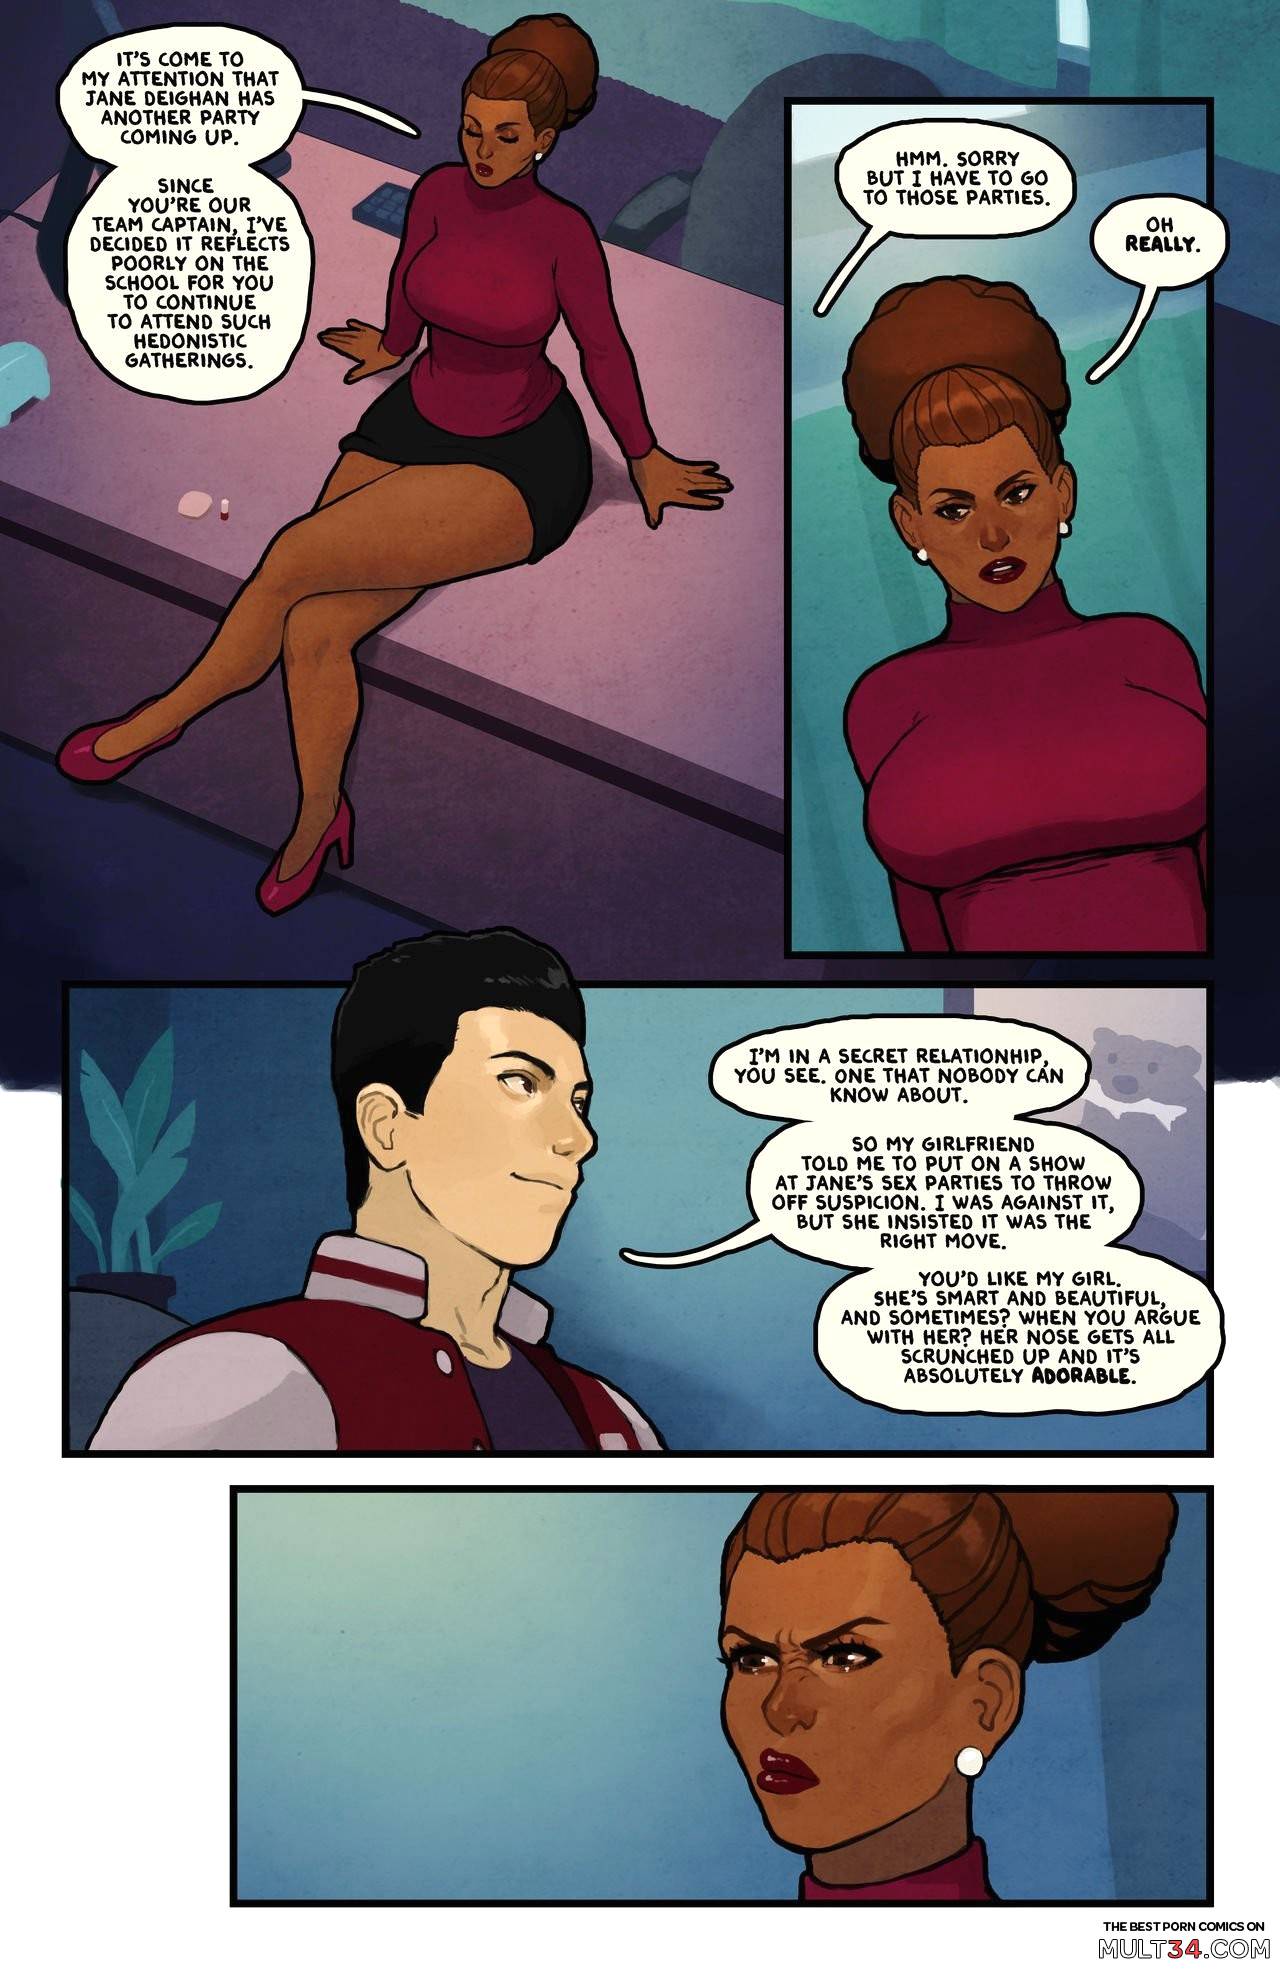 This Romantic World 6 page 25